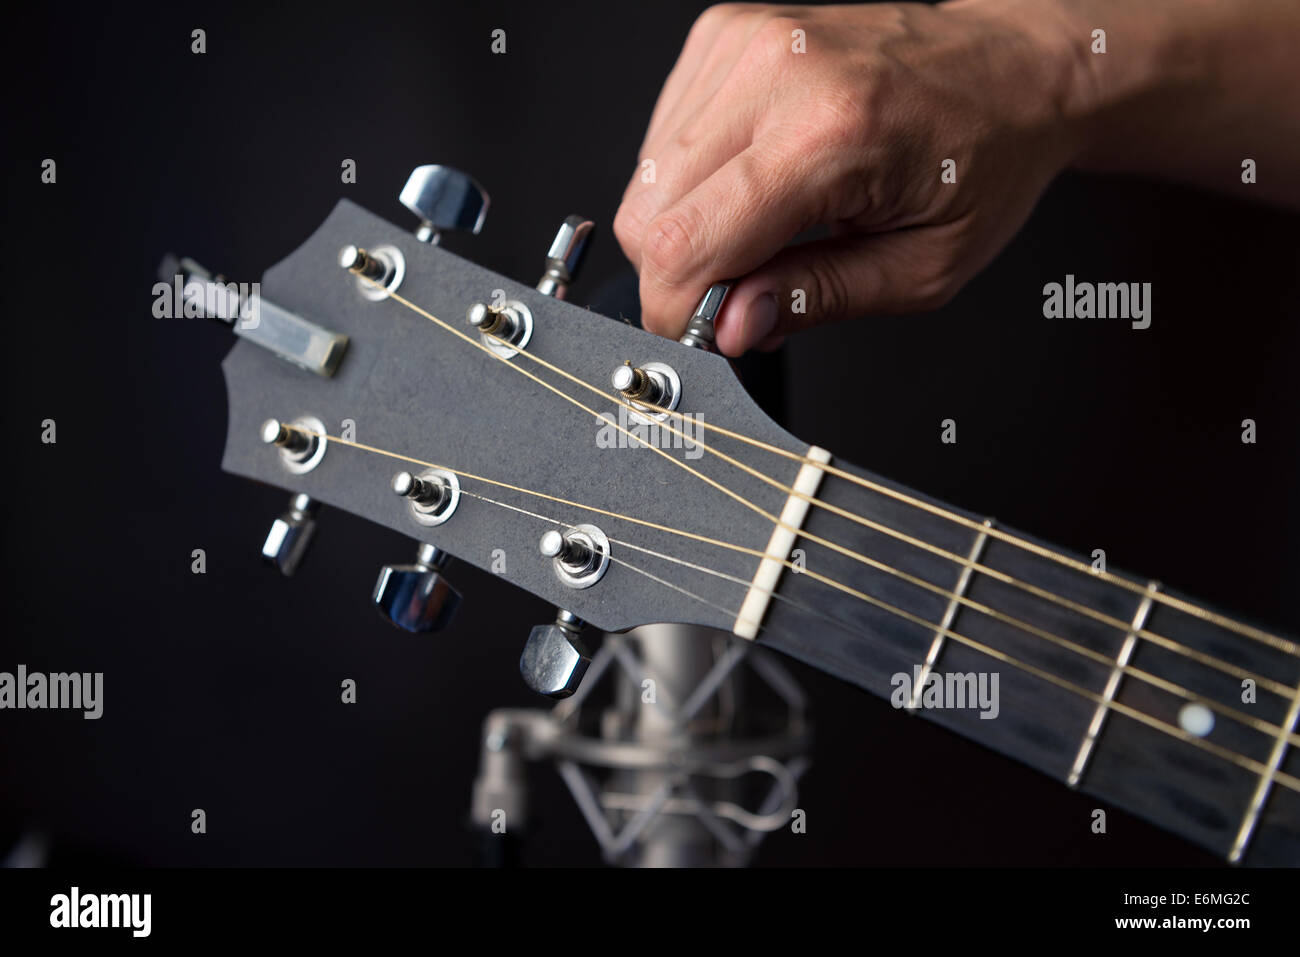 Close-up of a hand turning a guitars tuning pegs with a studio microphone in the background. Stock Photo